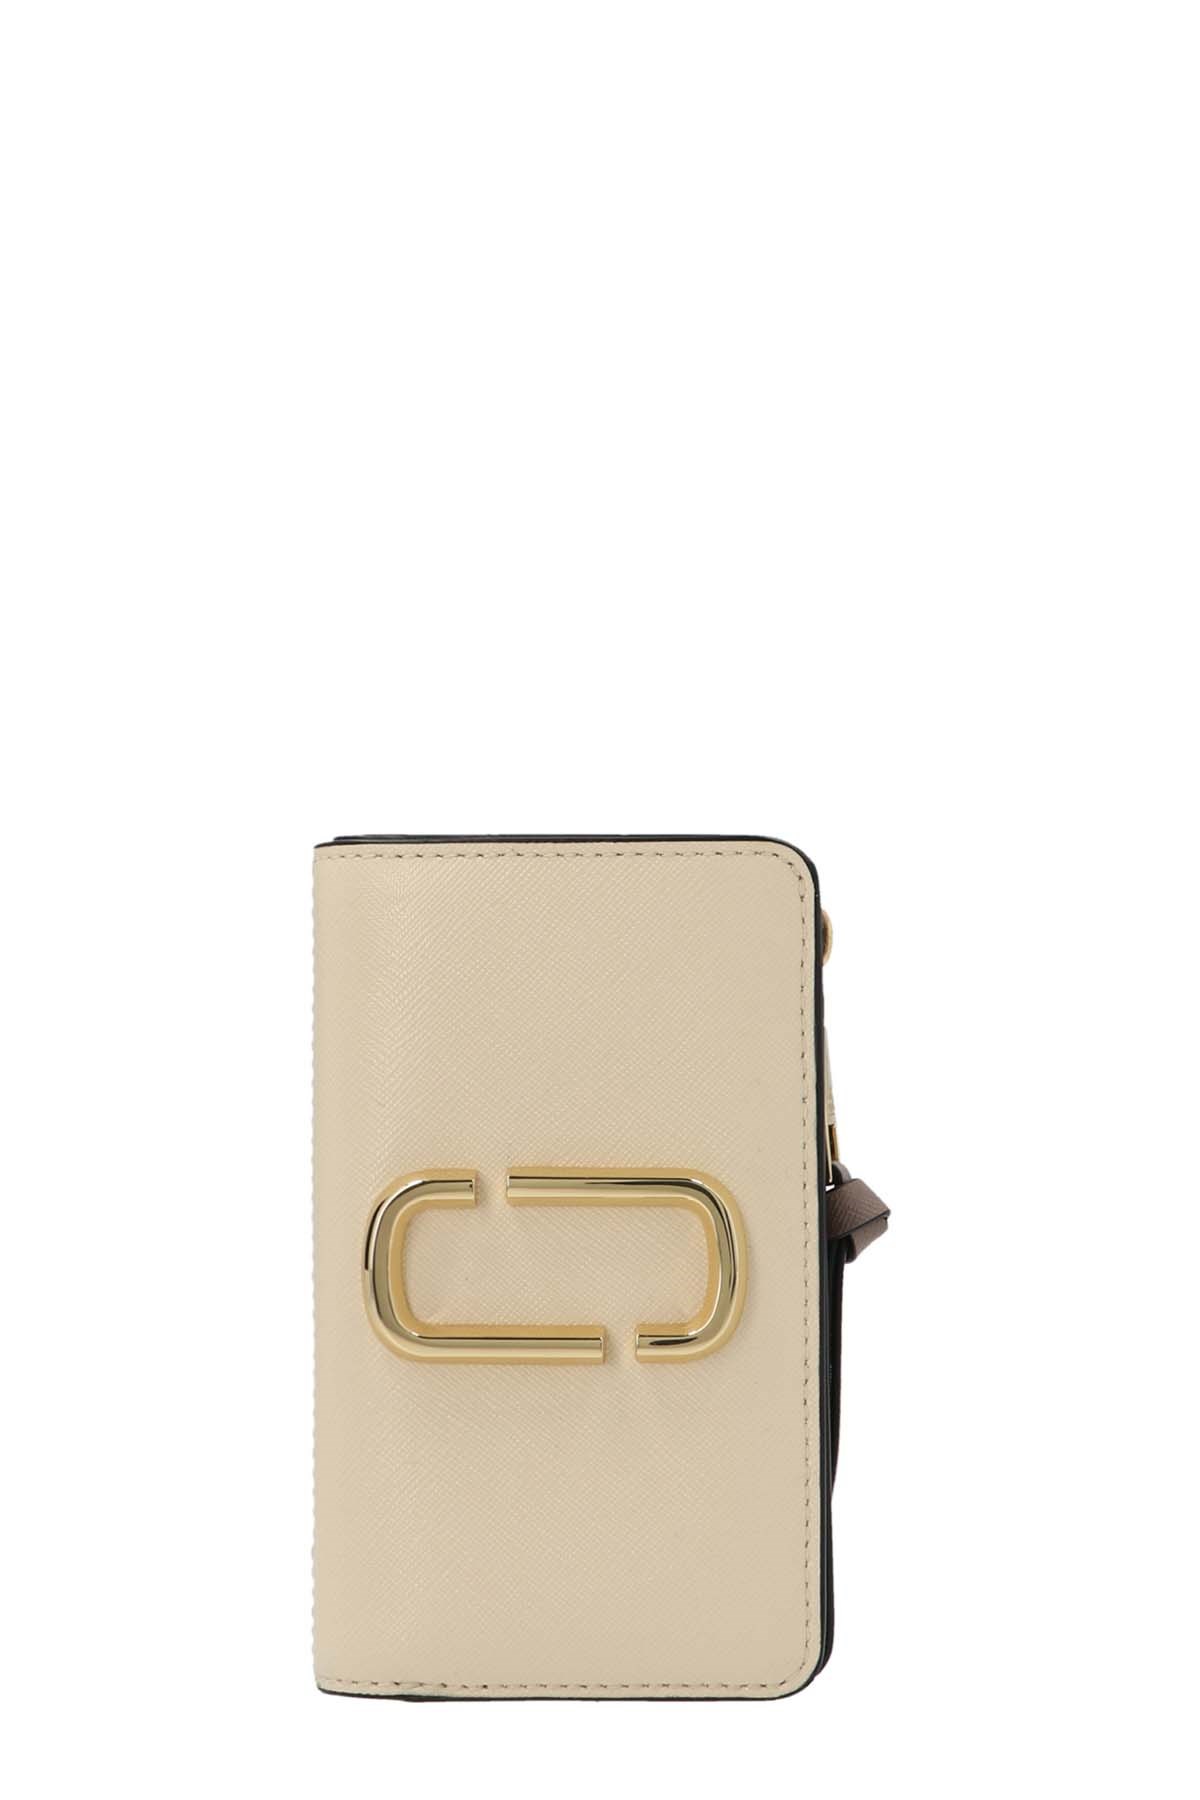 MARC JACOBS 'The Snapshot Compact' Wallet